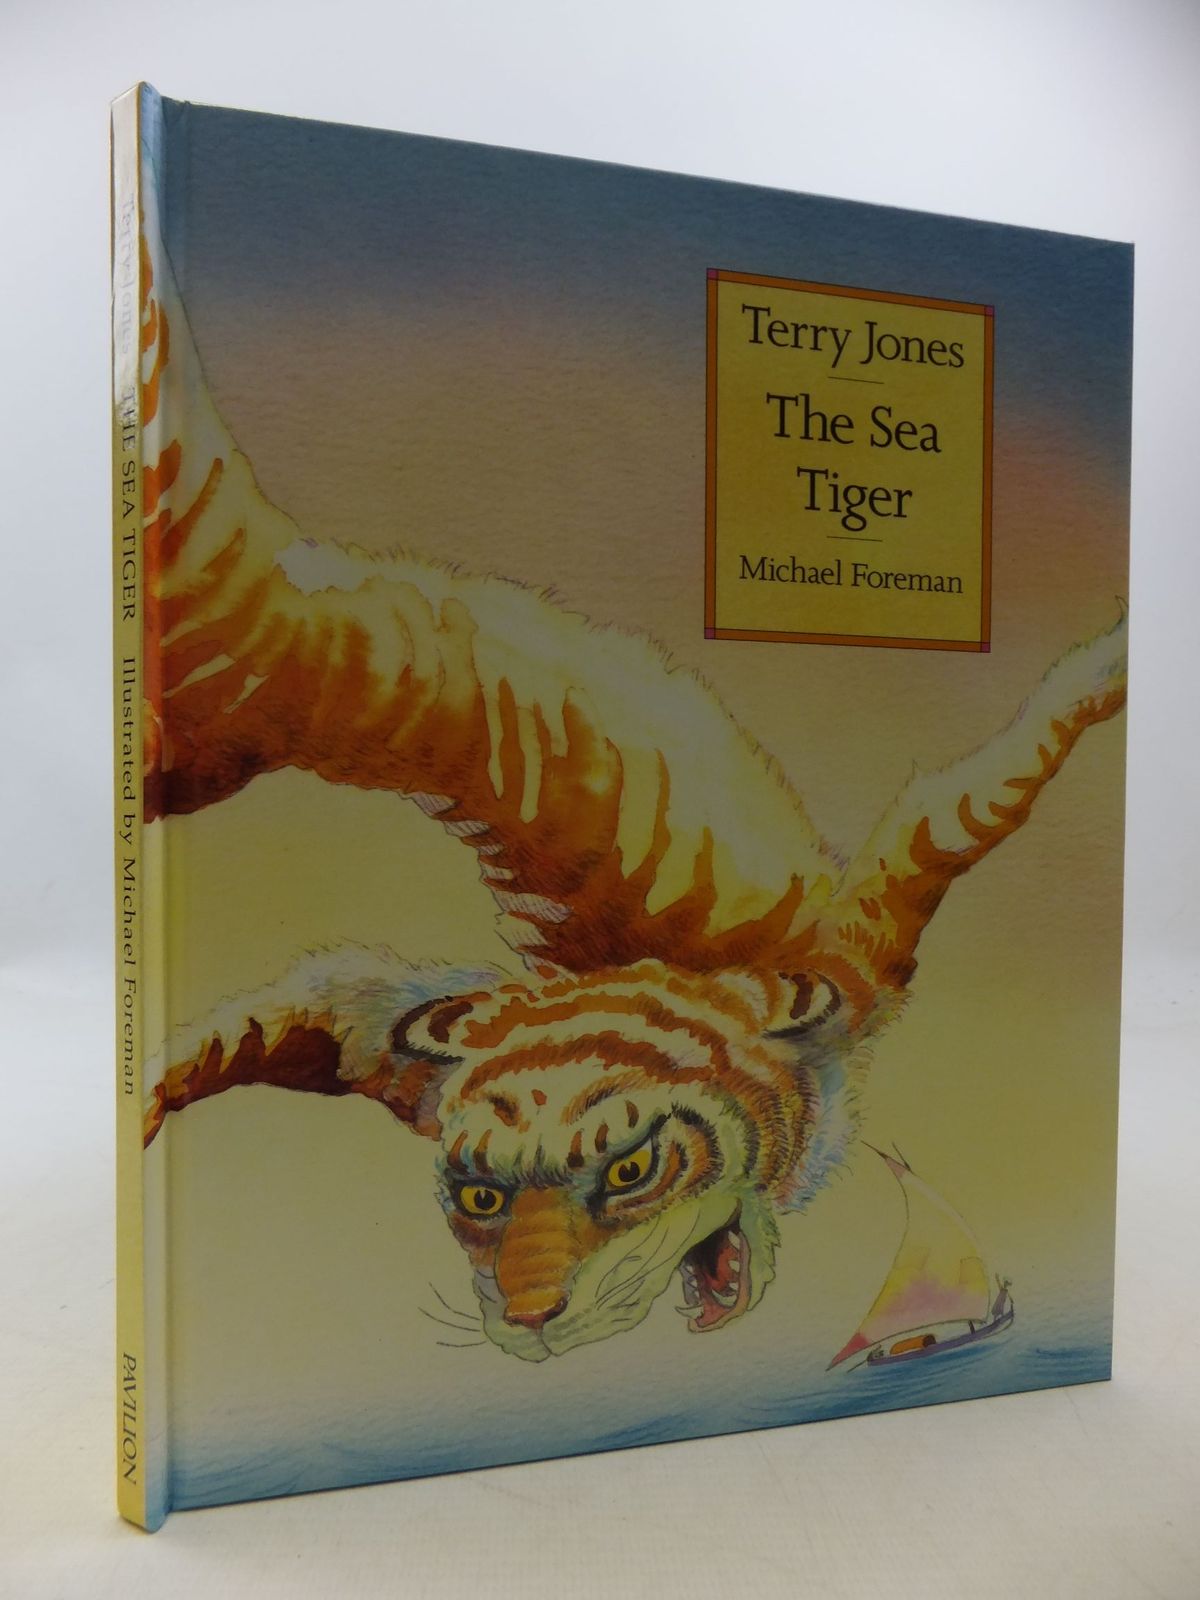 Photo of THE SEA TIGER written by Jones, Terry illustrated by Foreman, Michael published by Pavilion Books Ltd. (STOCK CODE: 1710256)  for sale by Stella & Rose's Books